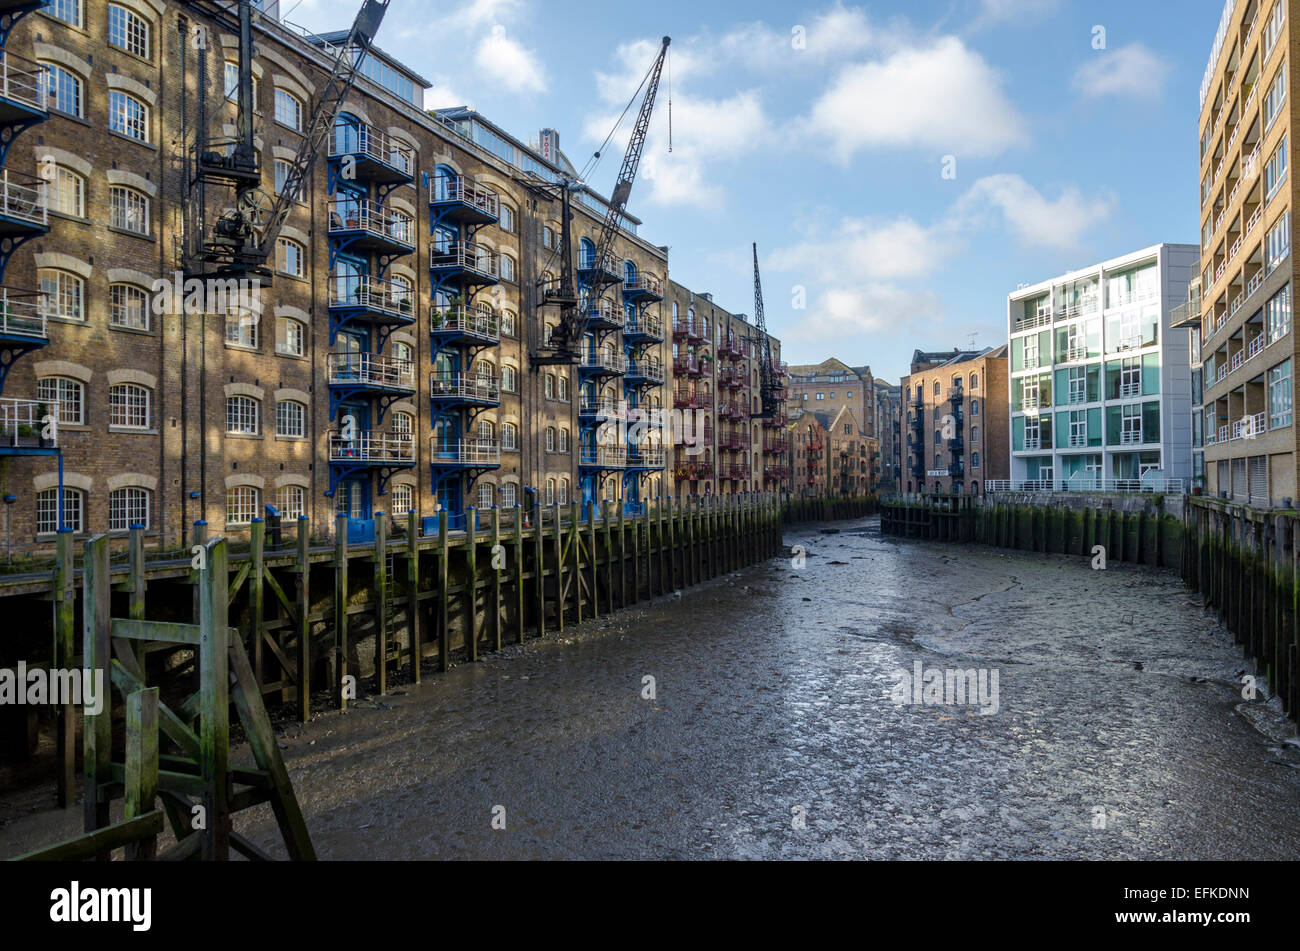 St Saviour's Dock, the mouth of the subterranean River Neckinger into the Thames, Southwark, London Stock Photo